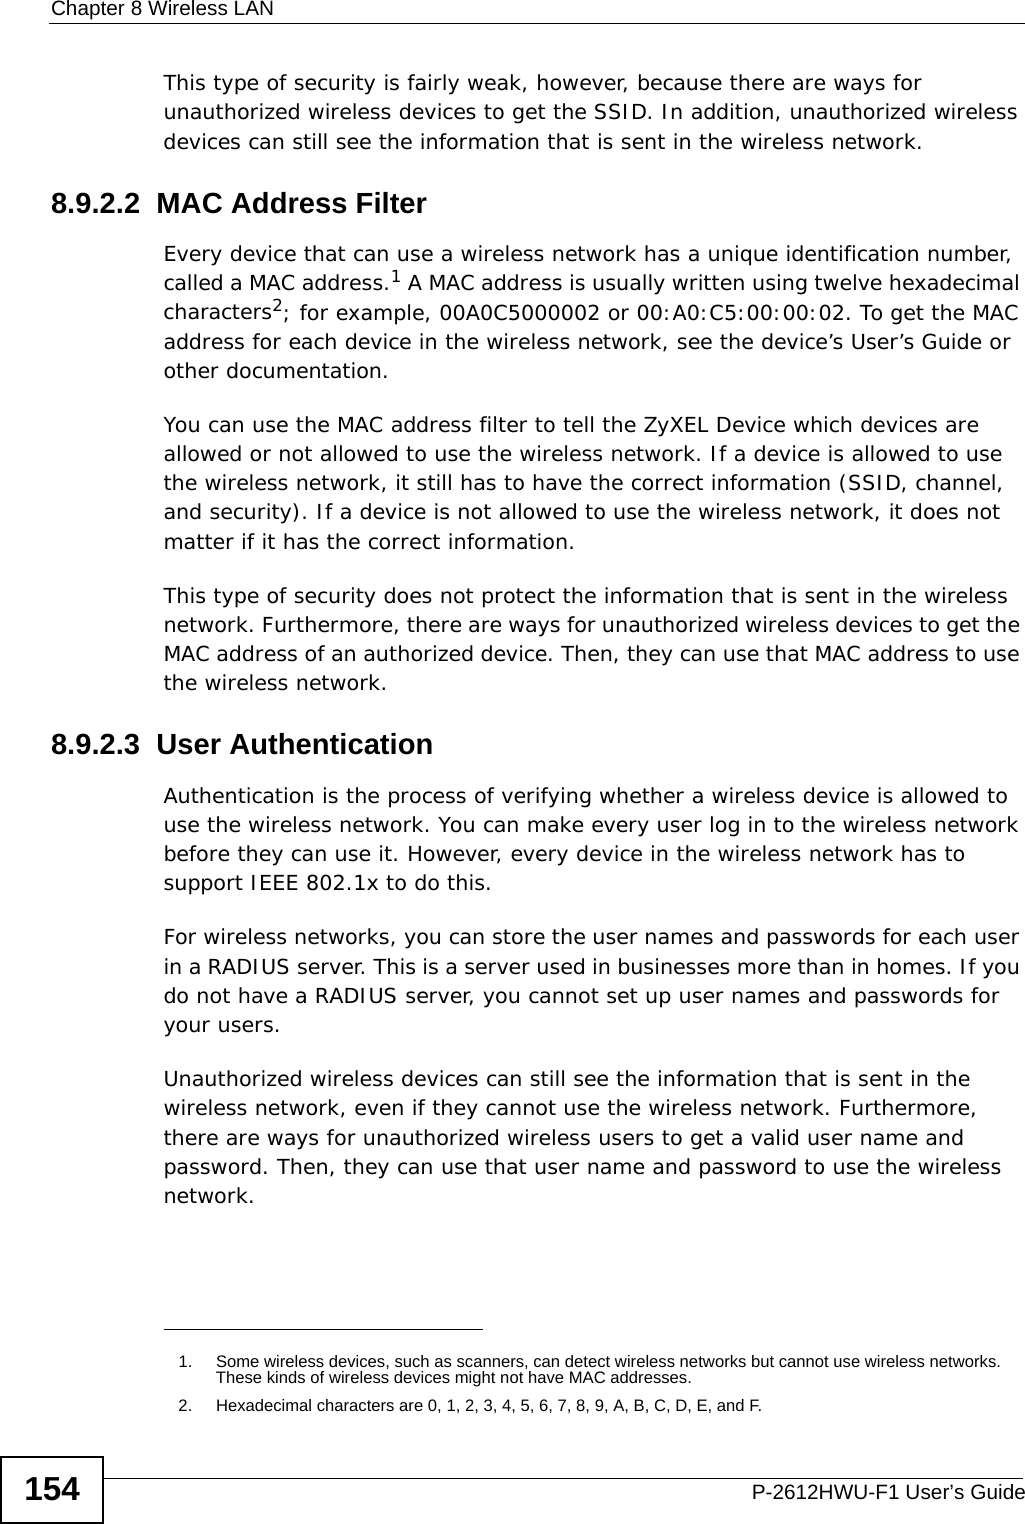 Chapter 8 Wireless LANP-2612HWU-F1 User’s Guide154This type of security is fairly weak, however, because there are ways for unauthorized wireless devices to get the SSID. In addition, unauthorized wireless devices can still see the information that is sent in the wireless network.8.9.2.2  MAC Address FilterEvery device that can use a wireless network has a unique identification number, called a MAC address.1 A MAC address is usually written using twelve hexadecimal characters2; for example, 00A0C5000002 or 00:A0:C5:00:00:02. To get the MAC address for each device in the wireless network, see the device’s User’s Guide or other documentation.You can use the MAC address filter to tell the ZyXEL Device which devices are allowed or not allowed to use the wireless network. If a device is allowed to use the wireless network, it still has to have the correct information (SSID, channel, and security). If a device is not allowed to use the wireless network, it does not matter if it has the correct information.This type of security does not protect the information that is sent in the wireless network. Furthermore, there are ways for unauthorized wireless devices to get the MAC address of an authorized device. Then, they can use that MAC address to use the wireless network.8.9.2.3  User AuthenticationAuthentication is the process of verifying whether a wireless device is allowed to use the wireless network. You can make every user log in to the wireless network before they can use it. However, every device in the wireless network has to support IEEE 802.1x to do this.For wireless networks, you can store the user names and passwords for each user in a RADIUS server. This is a server used in businesses more than in homes. If you do not have a RADIUS server, you cannot set up user names and passwords for your users.Unauthorized wireless devices can still see the information that is sent in the wireless network, even if they cannot use the wireless network. Furthermore, there are ways for unauthorized wireless users to get a valid user name and password. Then, they can use that user name and password to use the wireless network.1. Some wireless devices, such as scanners, can detect wireless networks but cannot use wireless networks. These kinds of wireless devices might not have MAC addresses.2. Hexadecimal characters are 0, 1, 2, 3, 4, 5, 6, 7, 8, 9, A, B, C, D, E, and F.